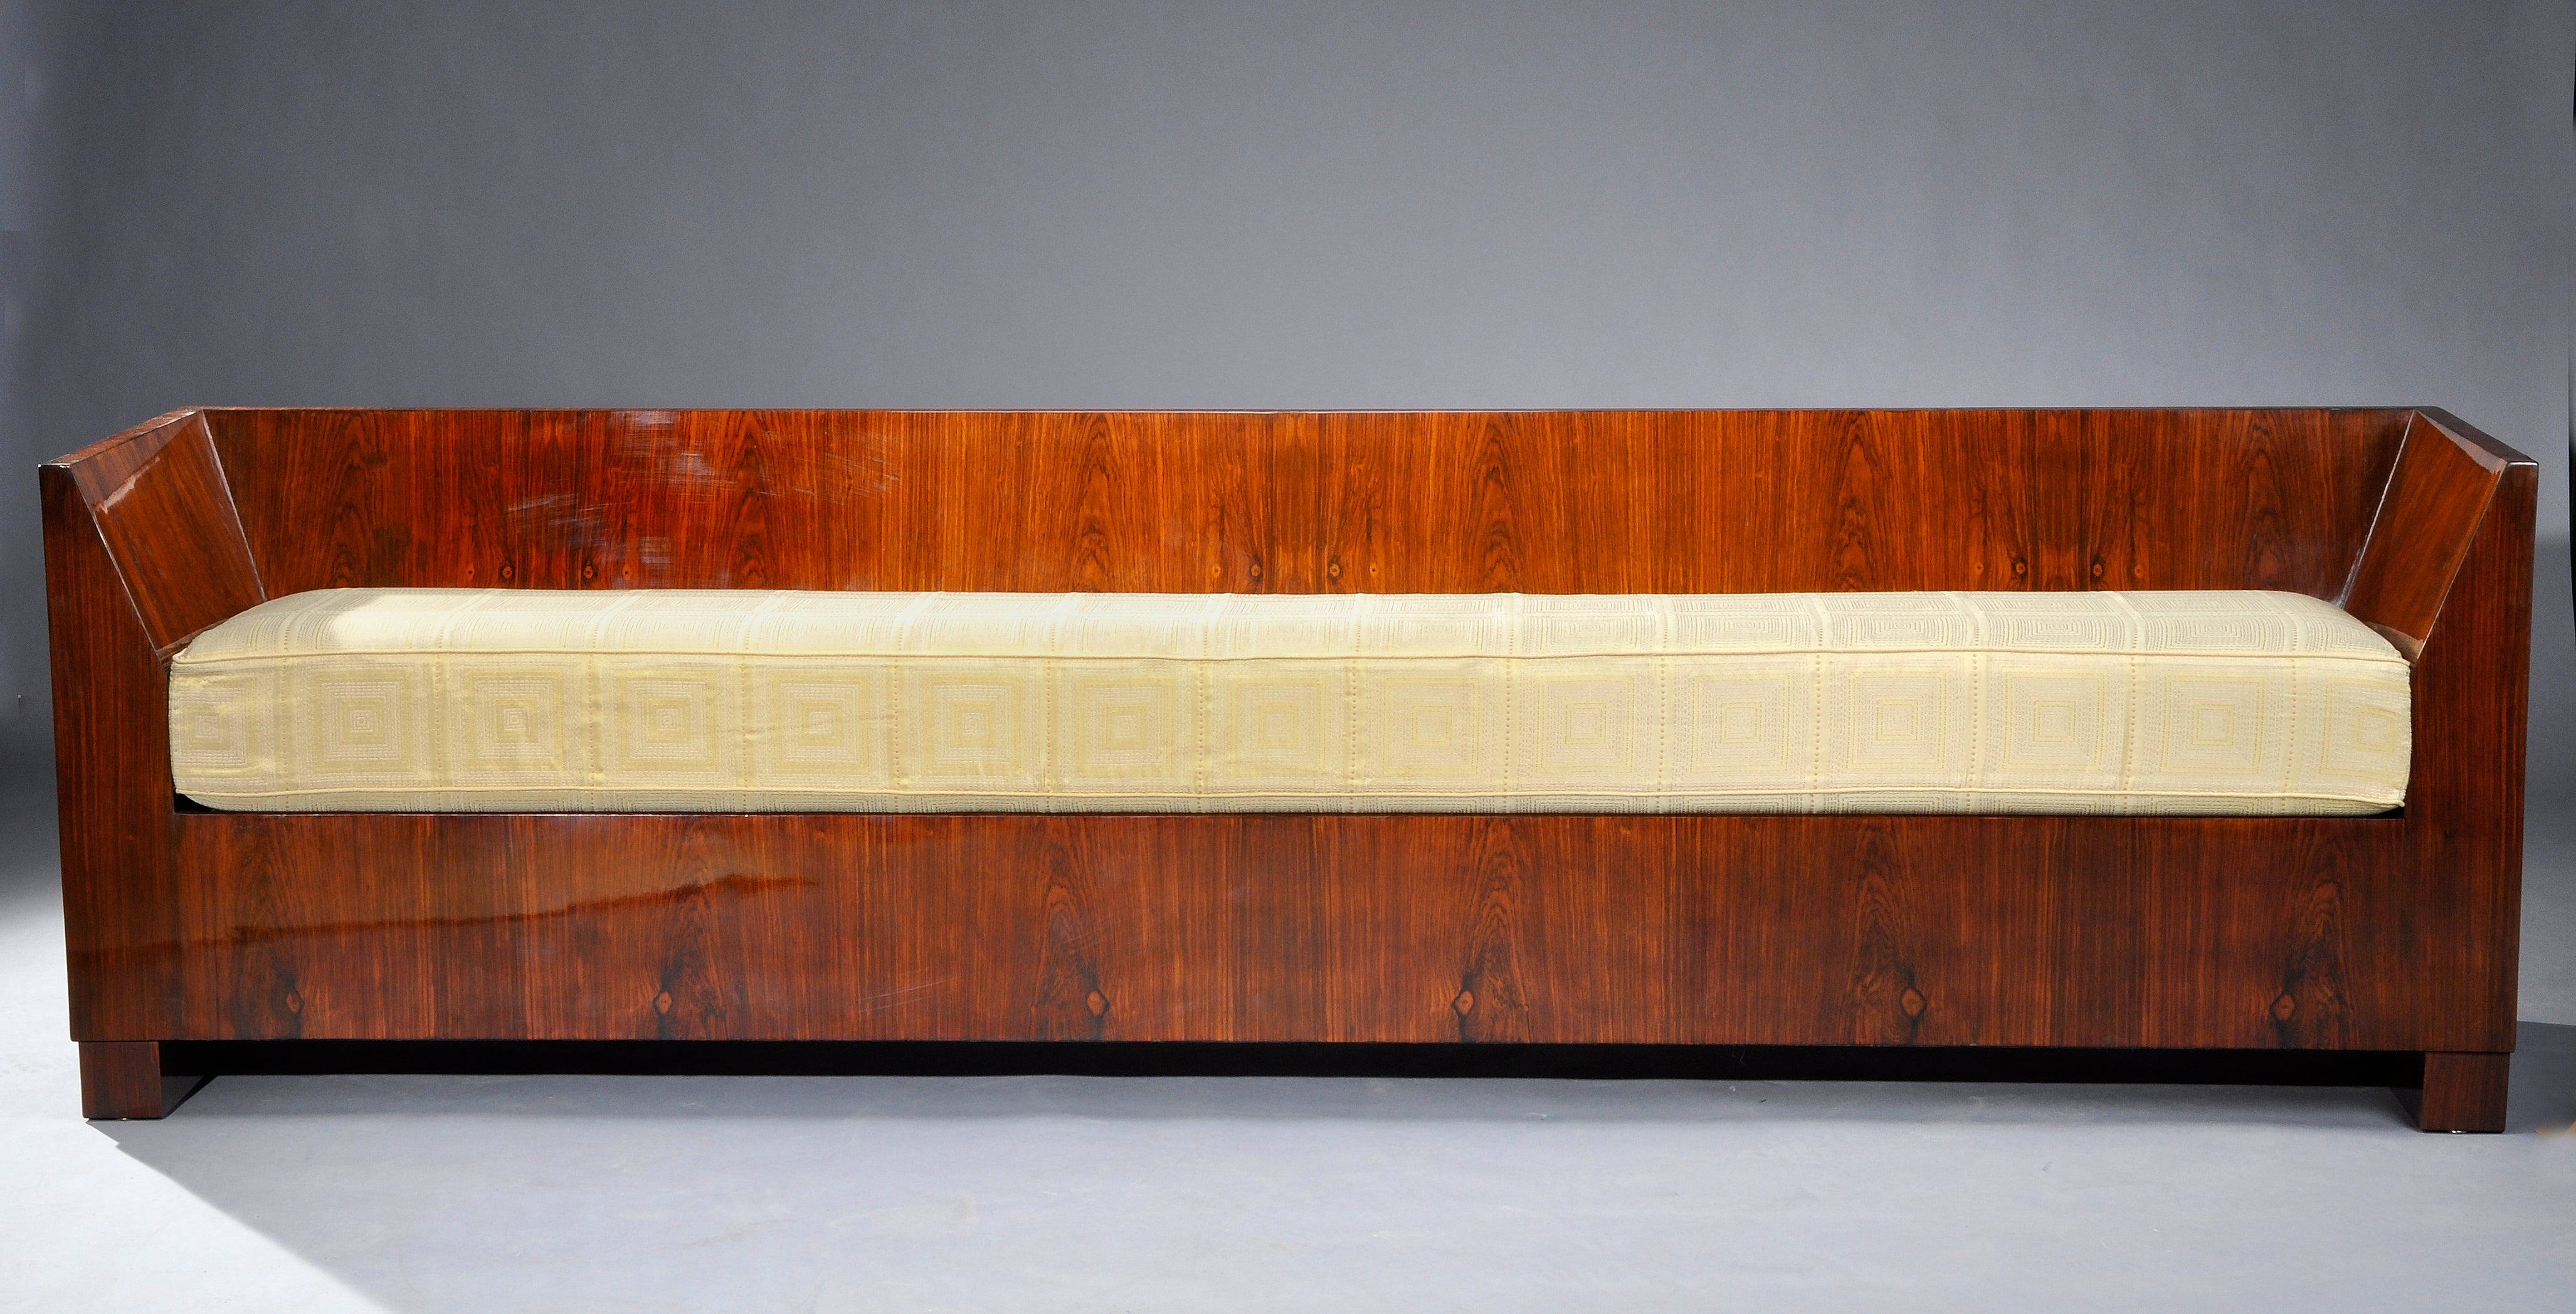 Long Modernist Art Deco Bench Attributed to Blanche Klotz, circa 1930 For Sale